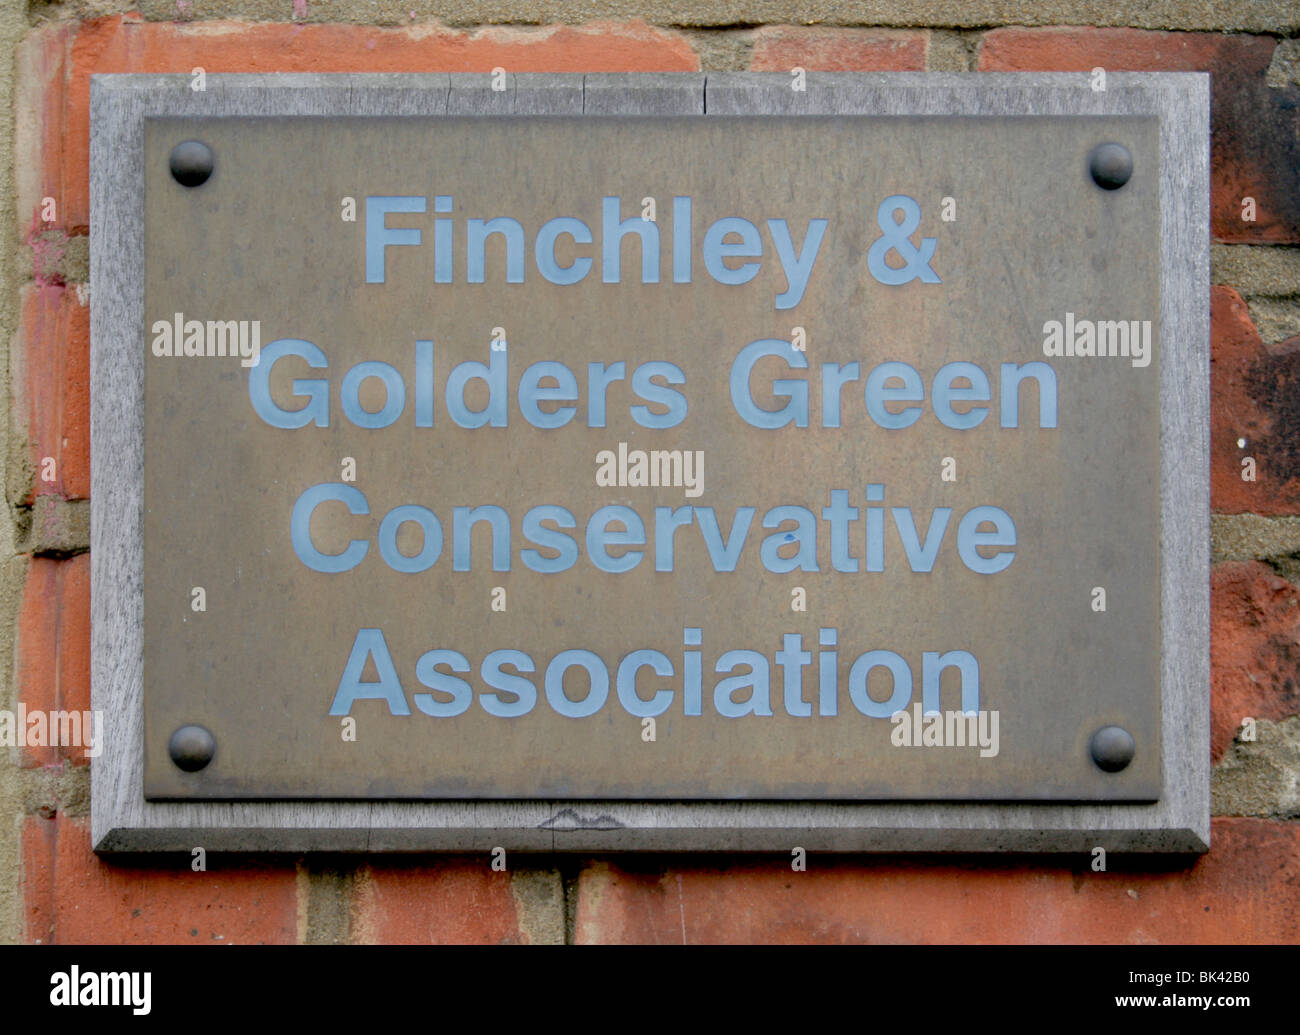 The Finchley & Golders Green Conservative Association Plaque. Stock Photo